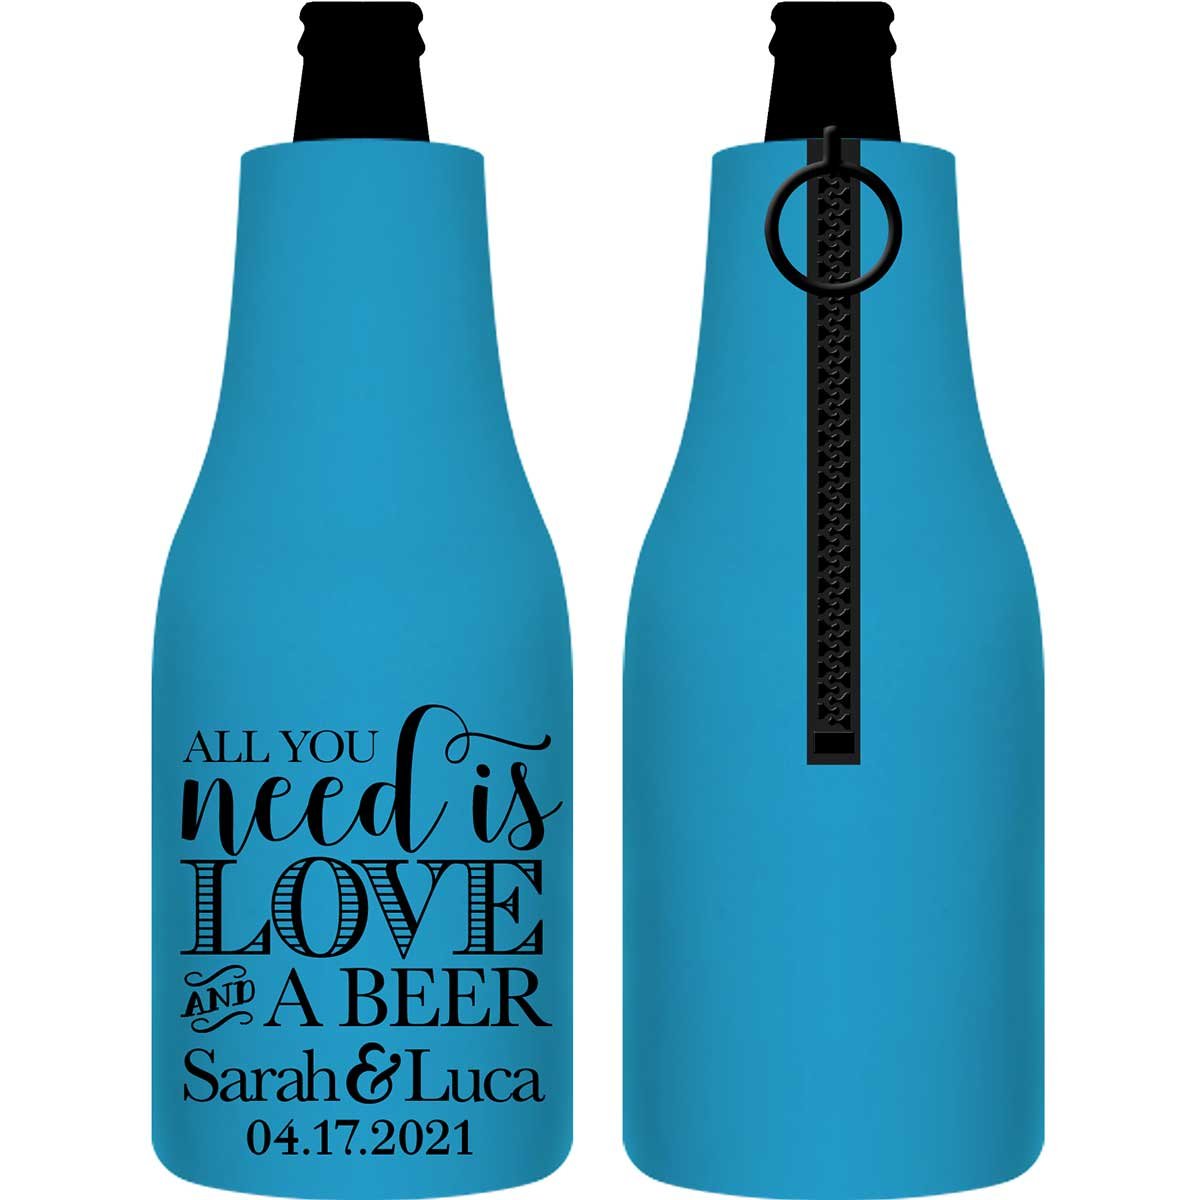 https://www.thatweddingshop.com/wp-content/uploads/2020/01/All-You-Need-Is-Love-And-A-Beer-1A-Collapsible-Foam-Zippered-Bottle-Koozies-Funny-Wedding-Favors.jpg